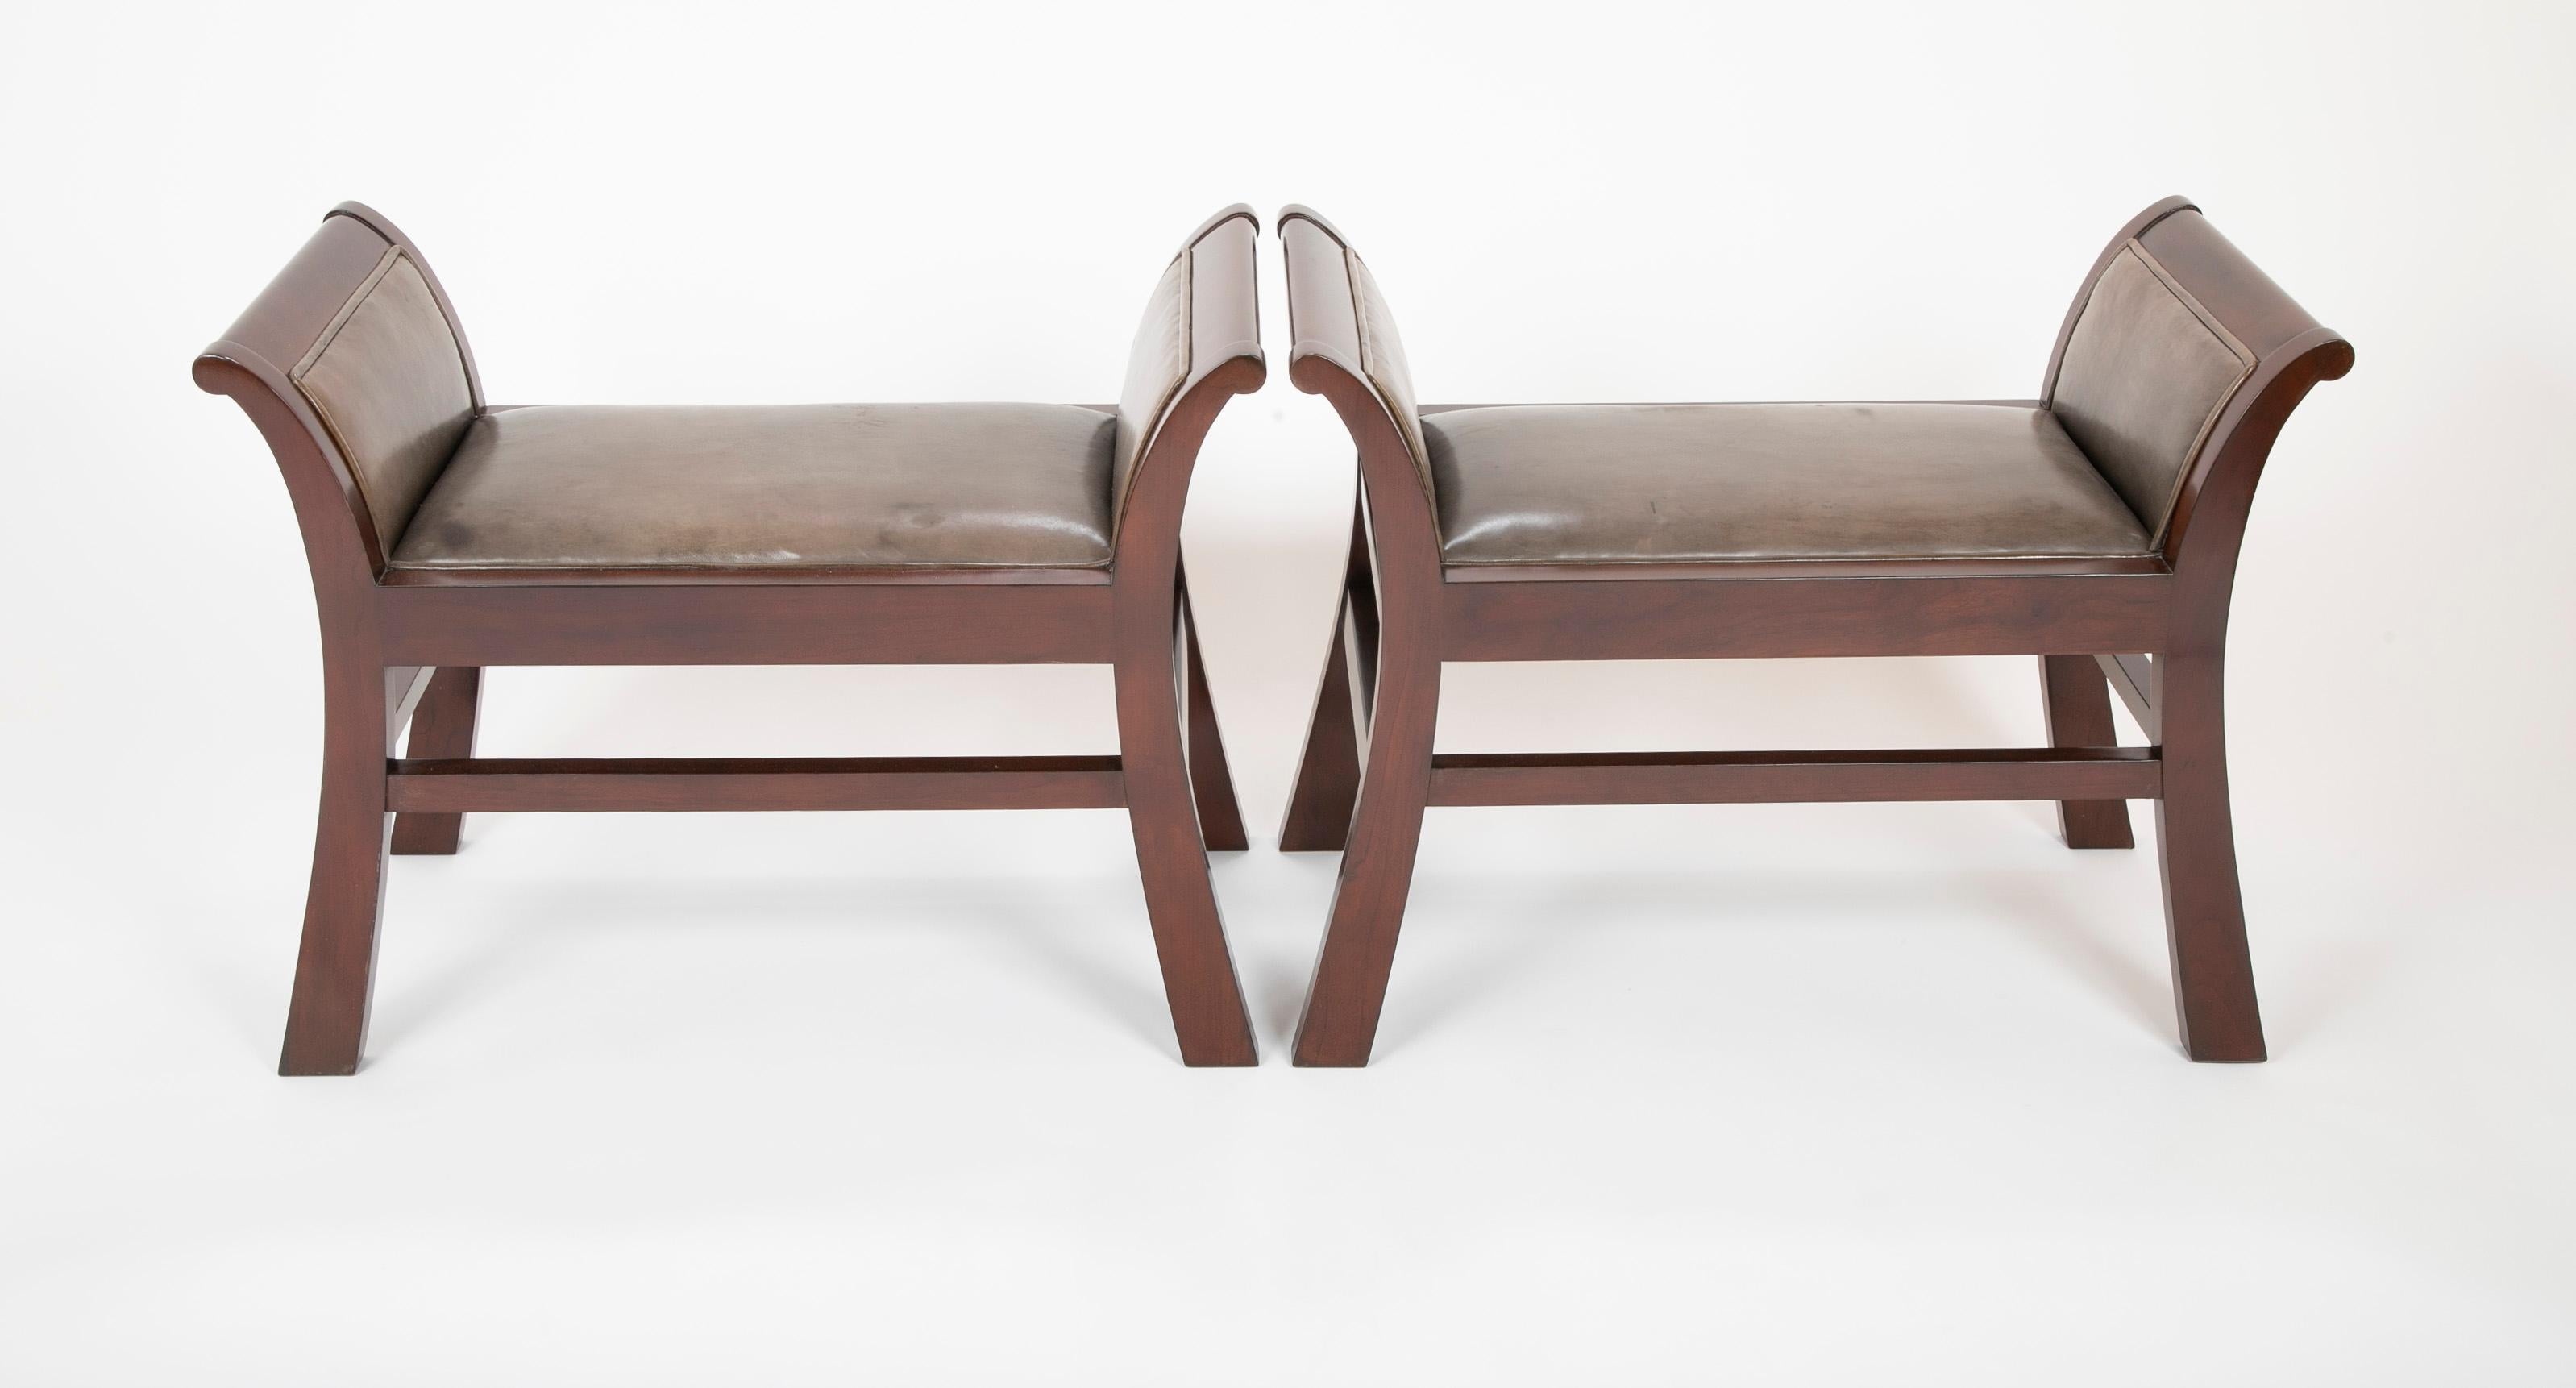 American Pair of Leather Benches Designed by Jacques Grange for John Widdicomb